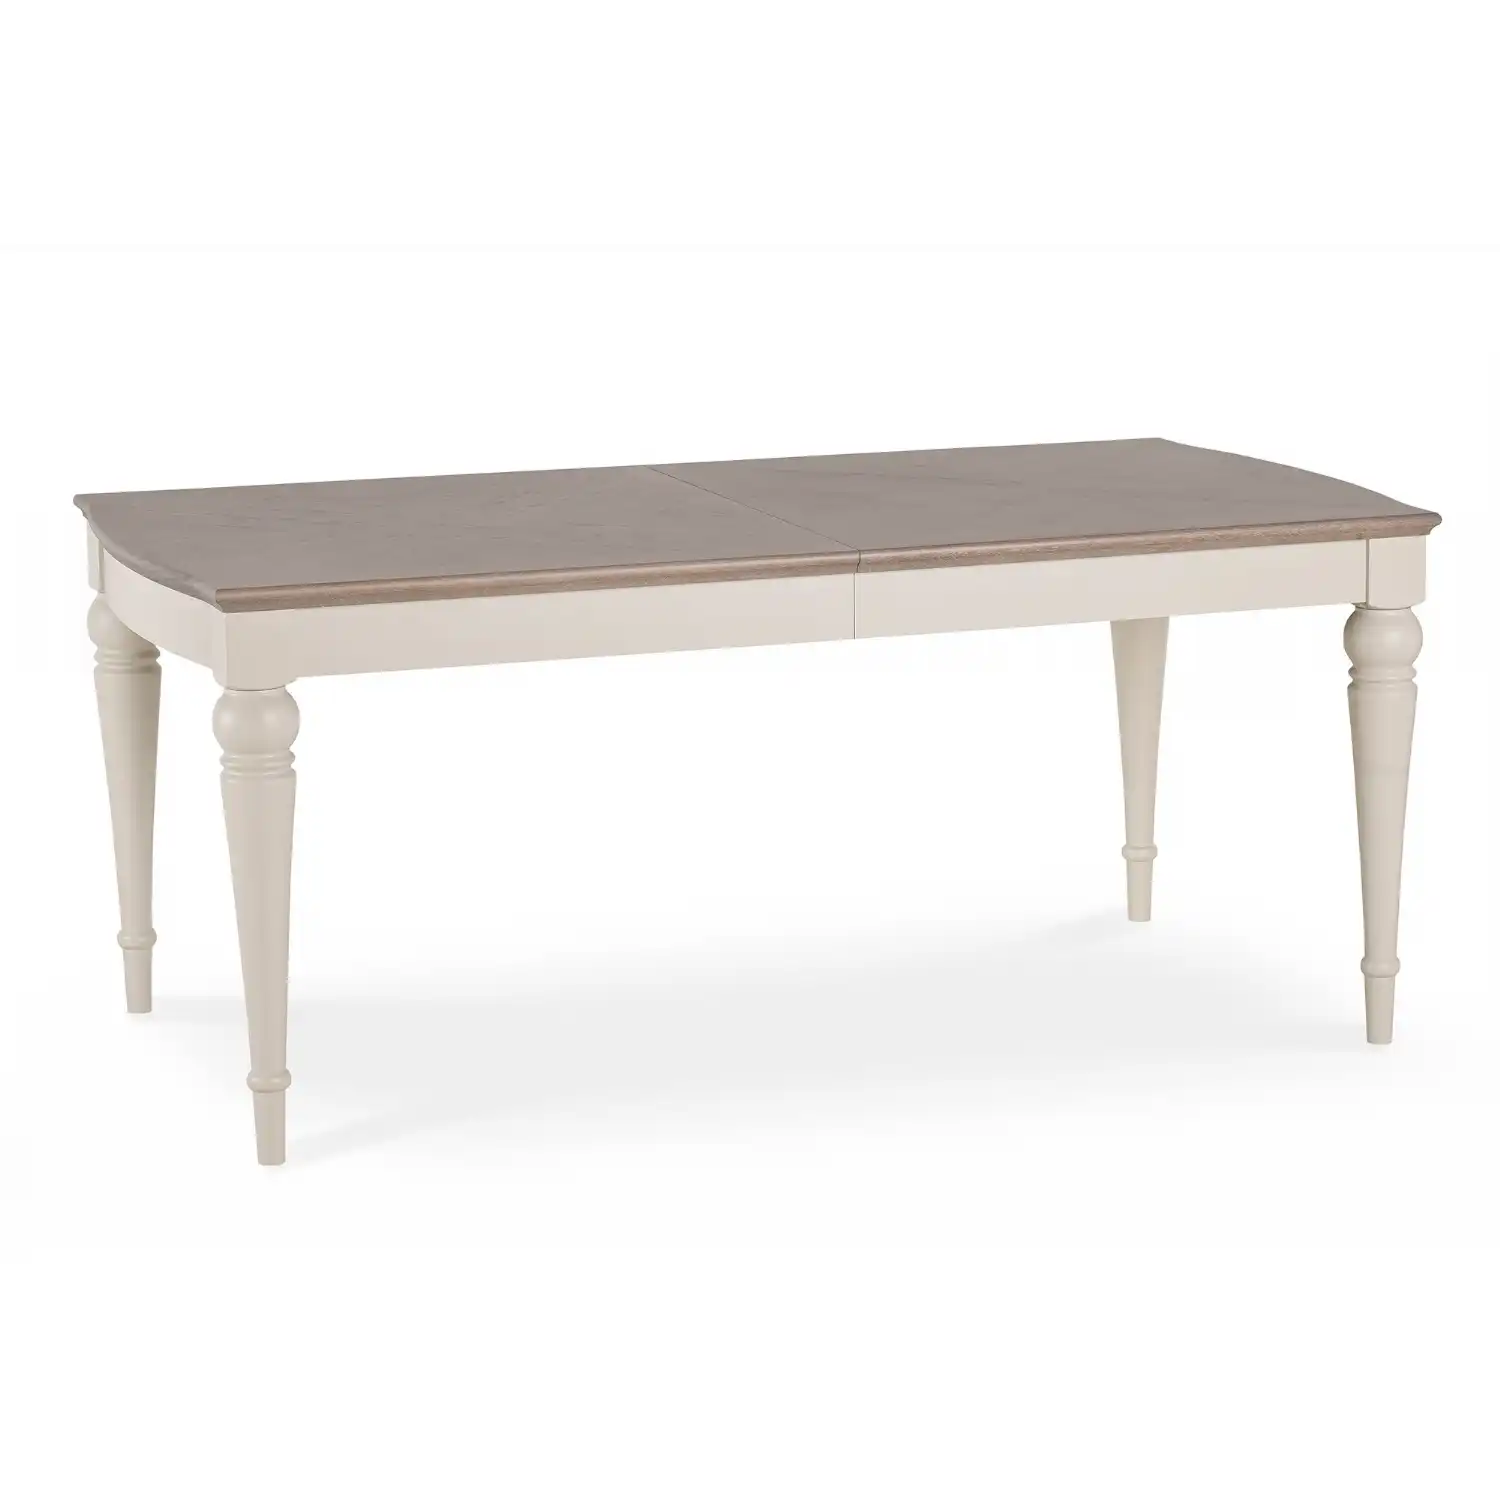 Large Grey Painted Patterned Oak Extending Dining Table